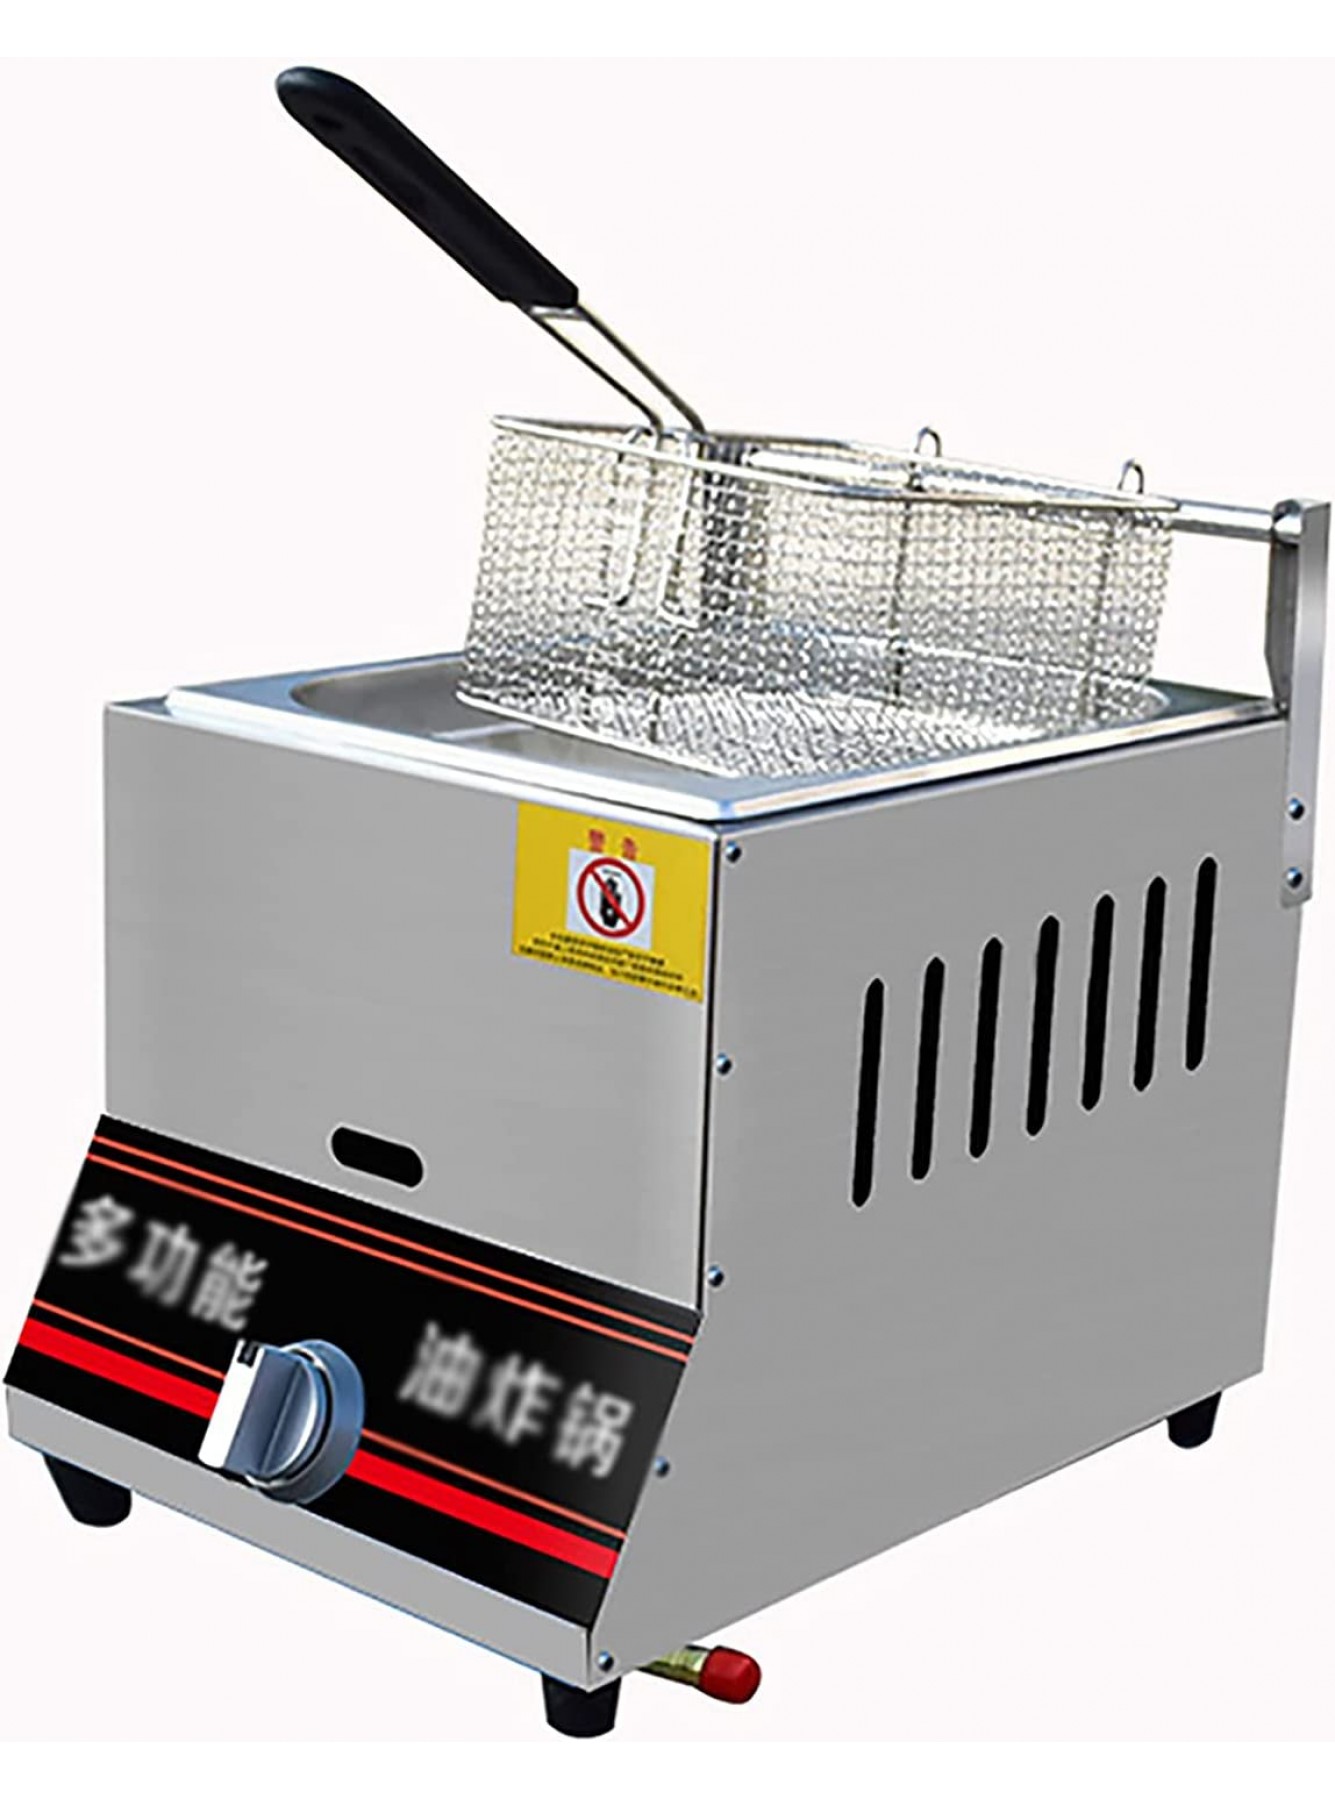 6L 12L Commercial LPG Gas Fryer Stainless Steel Countertop Deep Fryer with Basket for French Fries Restaurant Home Kitchen B09CCT1FFX